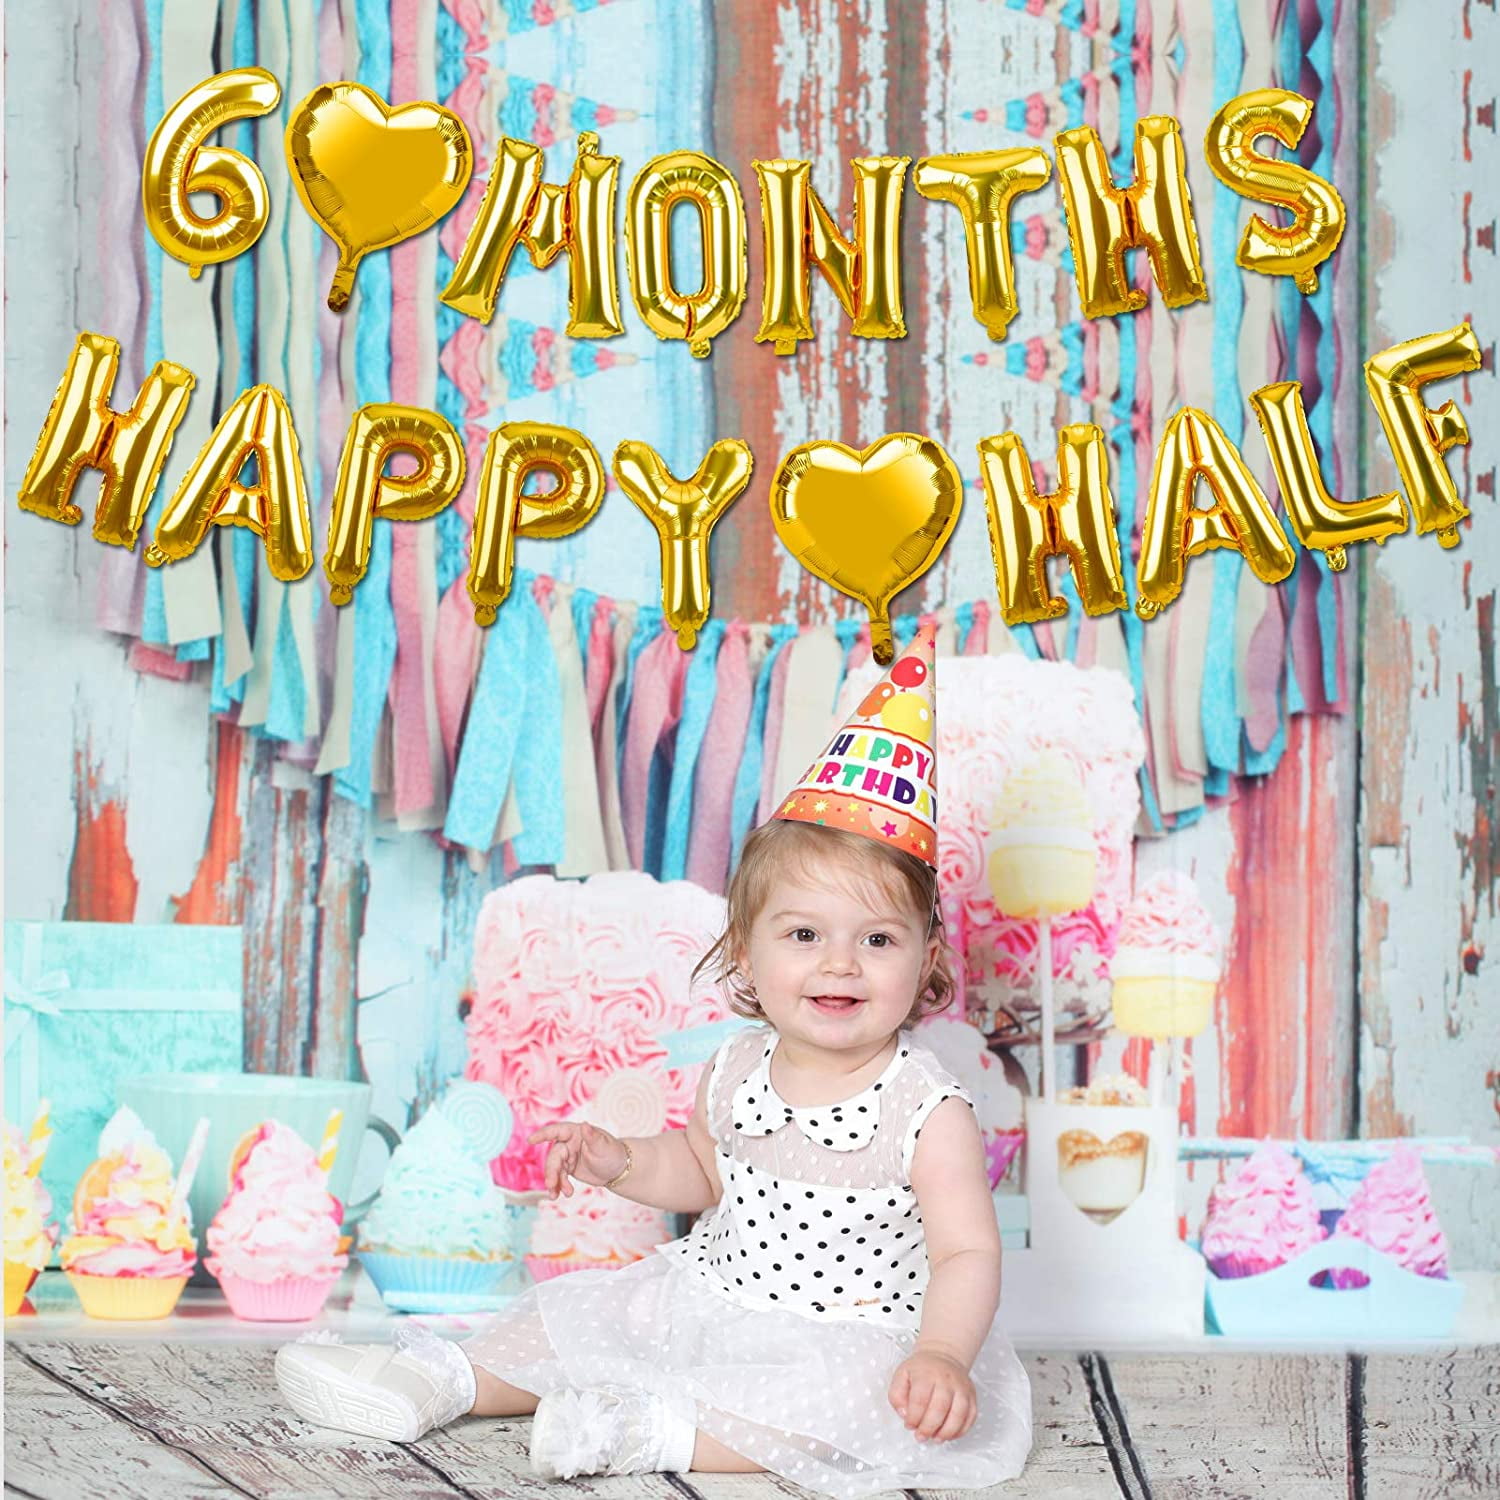 Party Propz Half Birthday Decorations Kit For Baby Girl Combo - 46Pcs Items  Set For 6 Months Birthday Decorations For Girl - 1/2 Birthday Decorations  For Girls - Half Birthday Banner, Balloons,